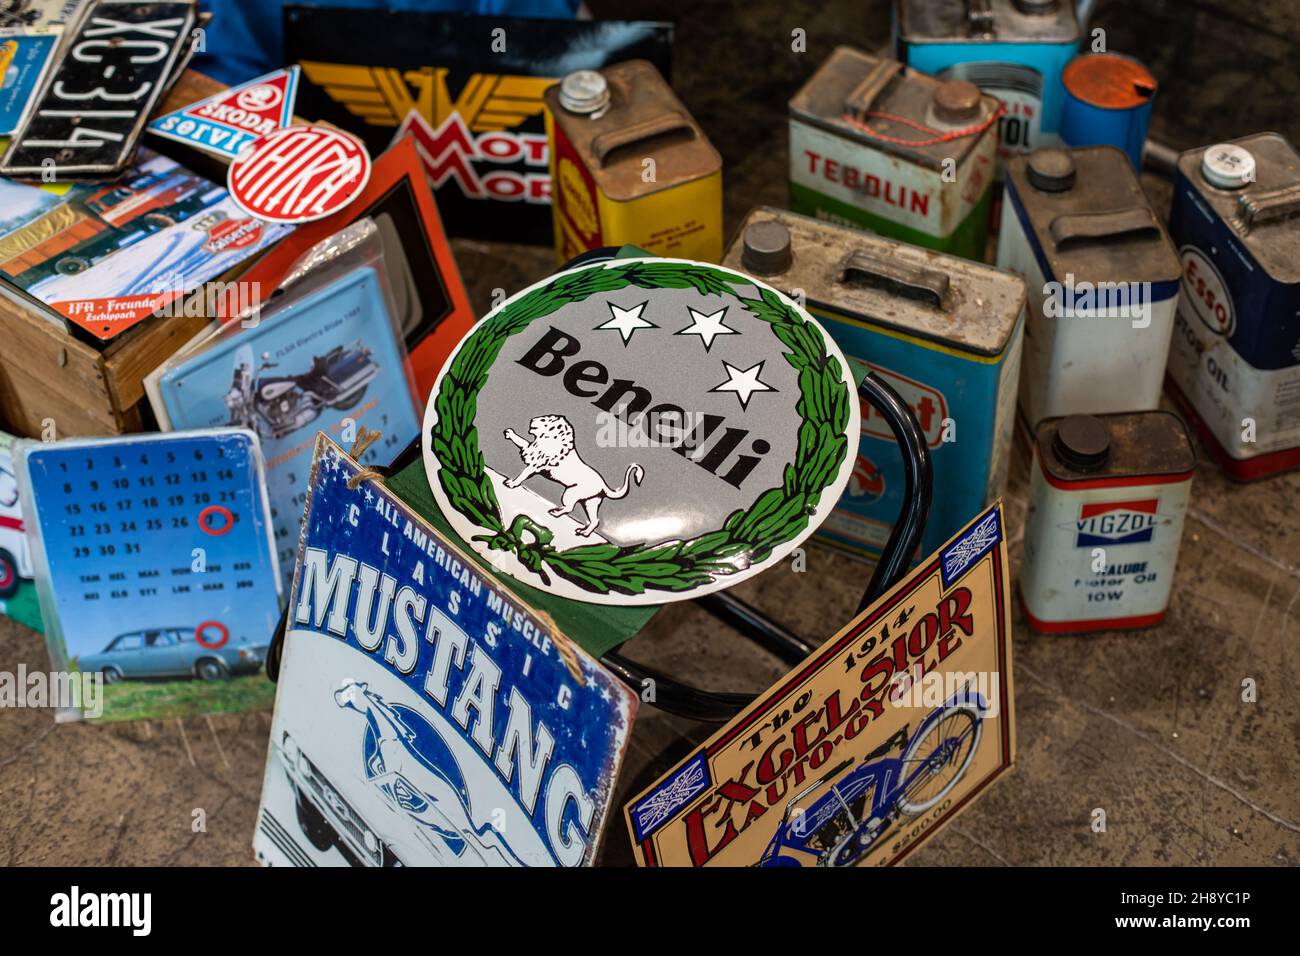 Car and motorcycle related memorabilia on sale at Retro & Vintage Design Expo in Helsinki, Finland Stock Photo